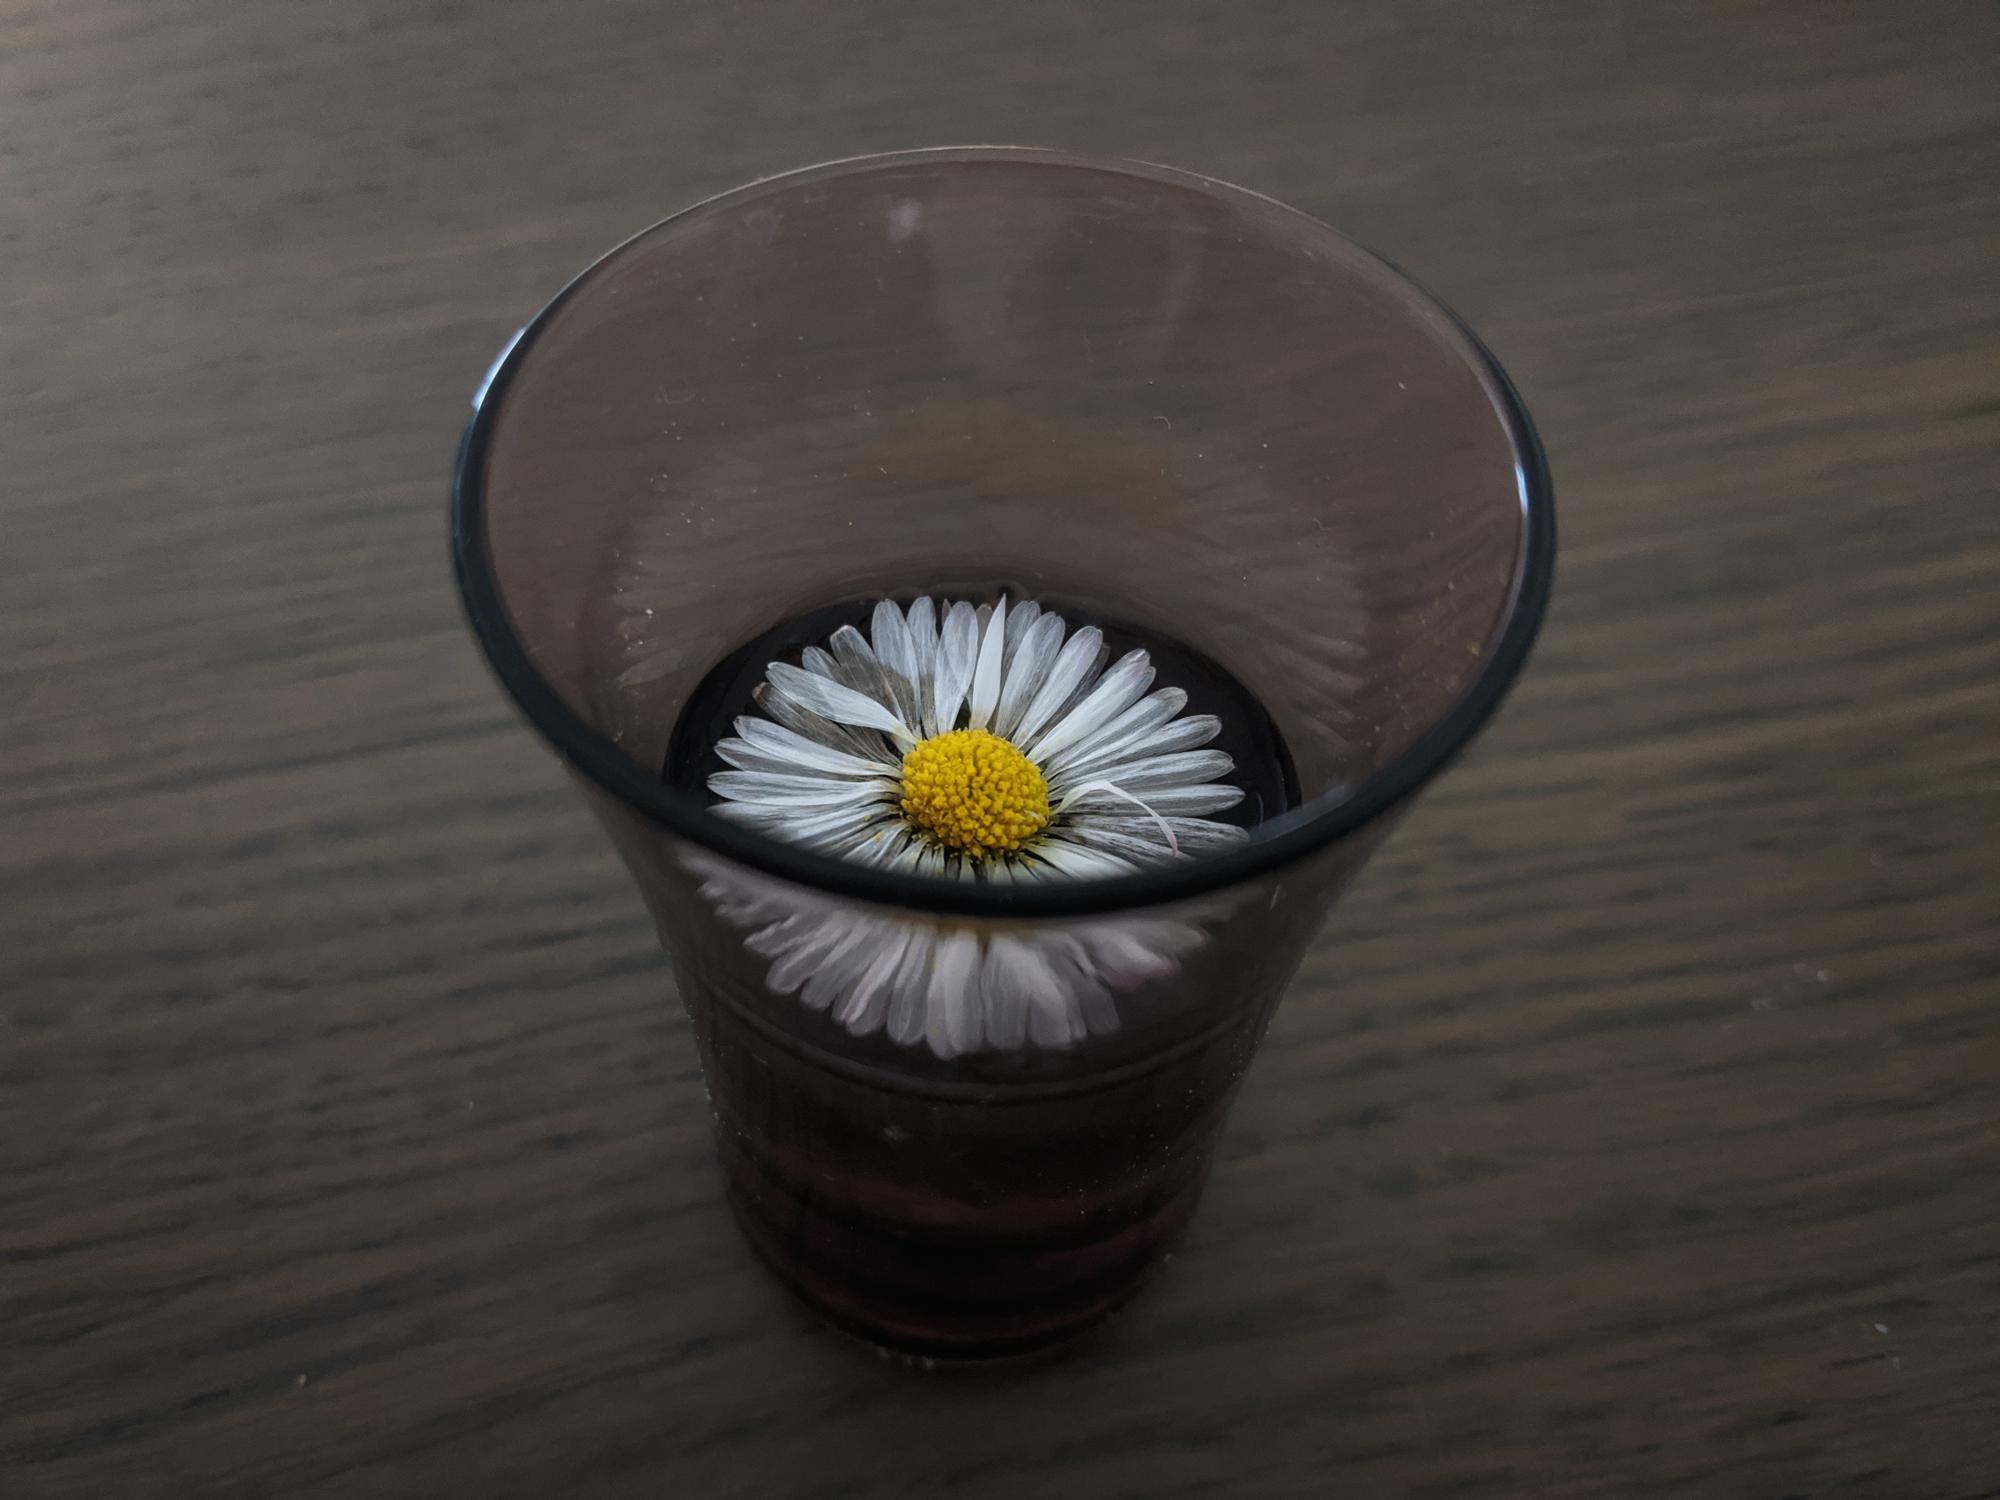 Tiny glass of water with daisy flower